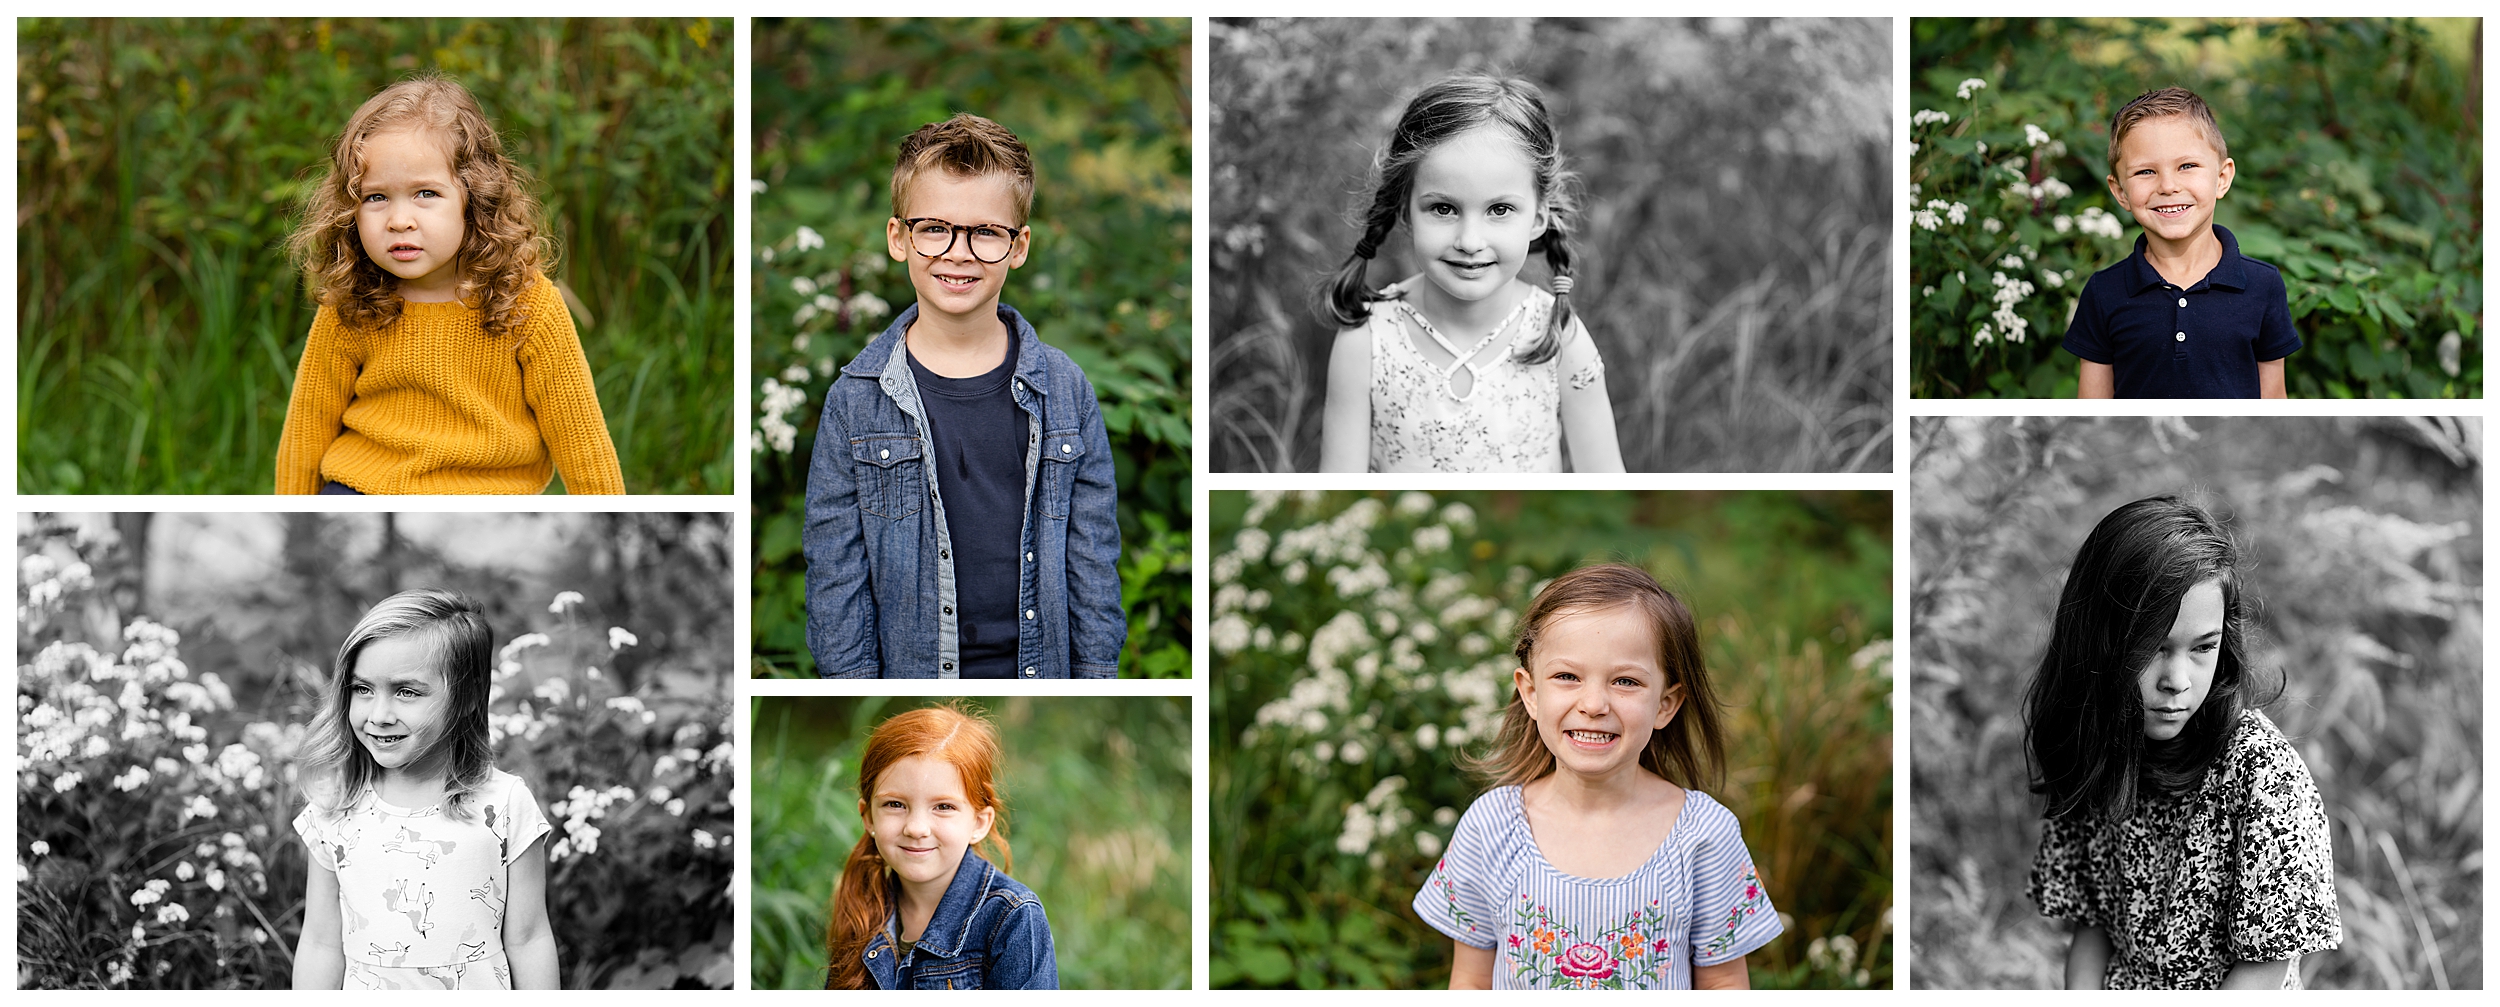 If your school is small and has a shady outdoor space to work in we may be able to offer outdoor school portraits. Please let me know upon inquiring if this is an option you would like.